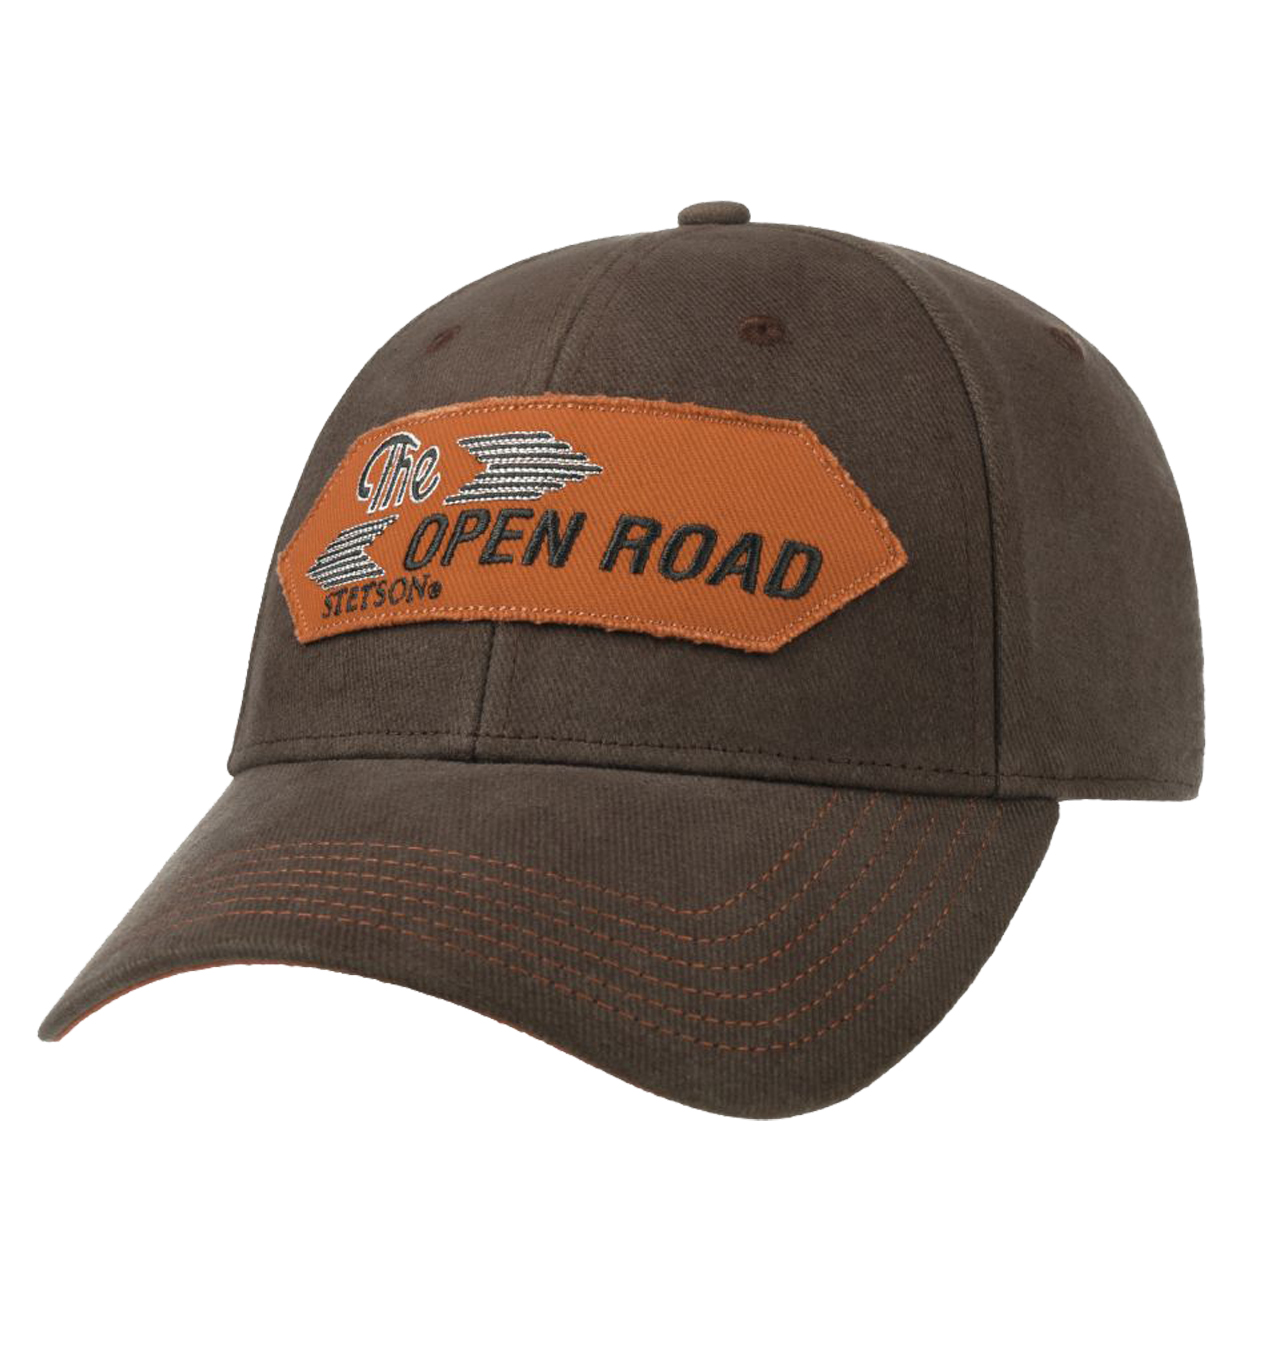 Stetson - The Open Road Cap - Brown